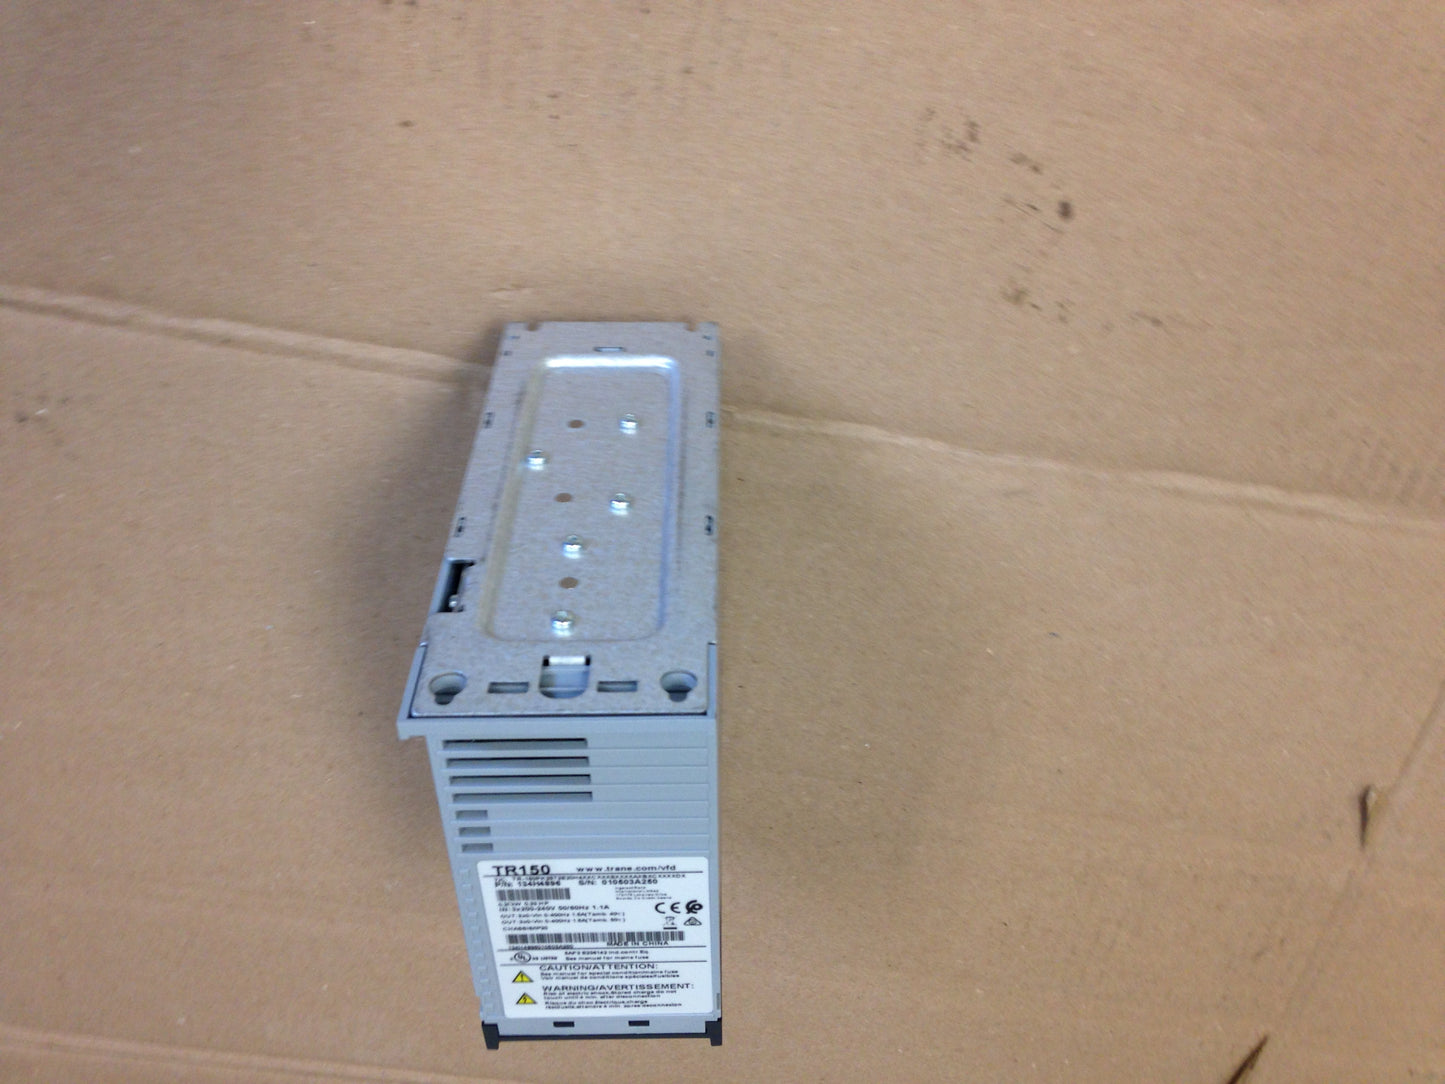 VARIABLE FREQUENCY DRIVE, 200-240/50-60, 1.1 AMPS